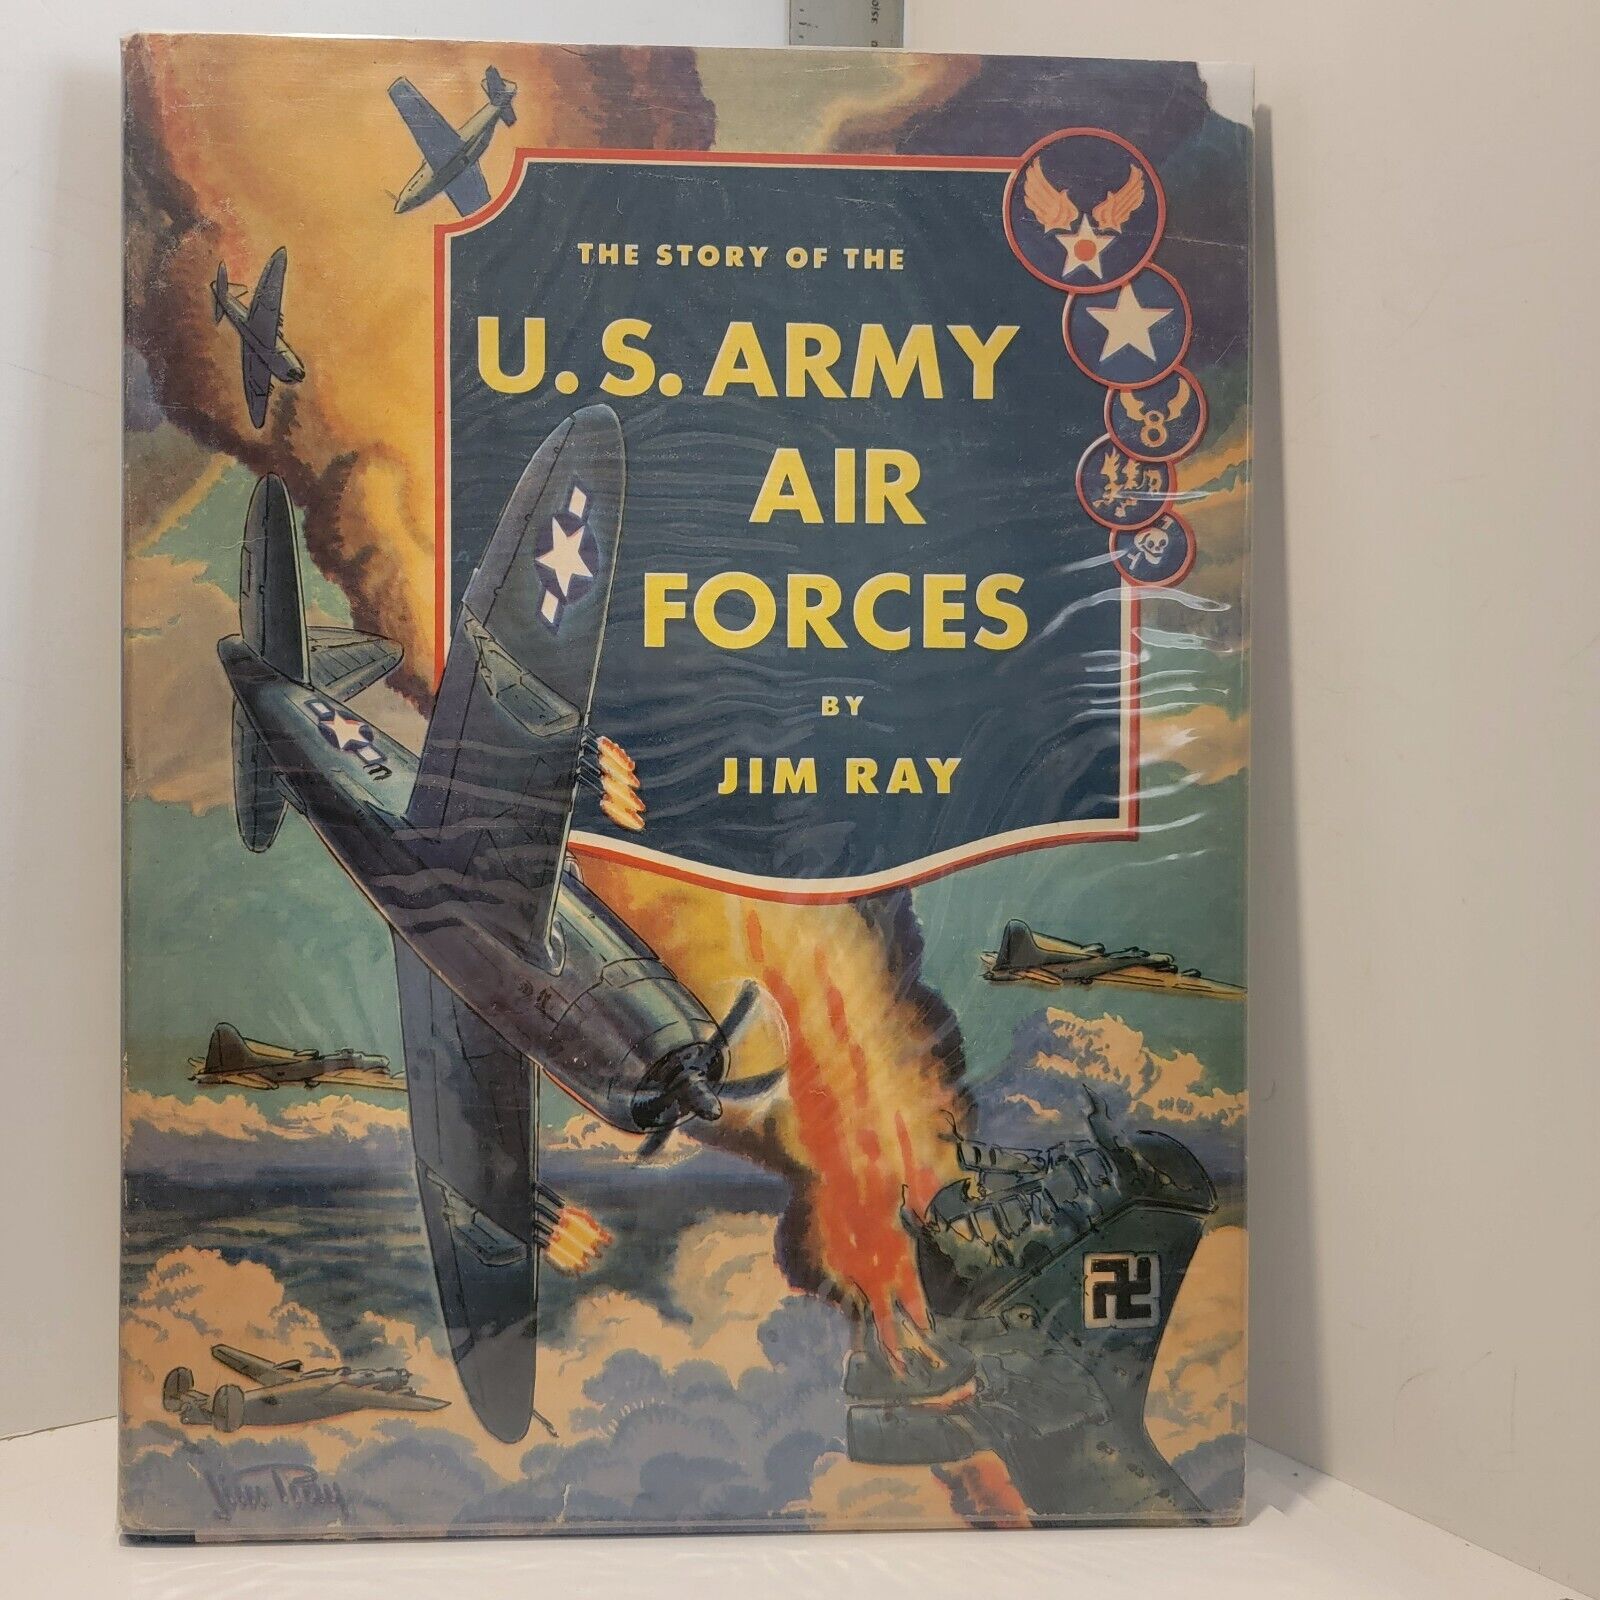 The Story of the U.S. Army Air Forces: Jim Ray HC/DJ/G  SHIPS FREE